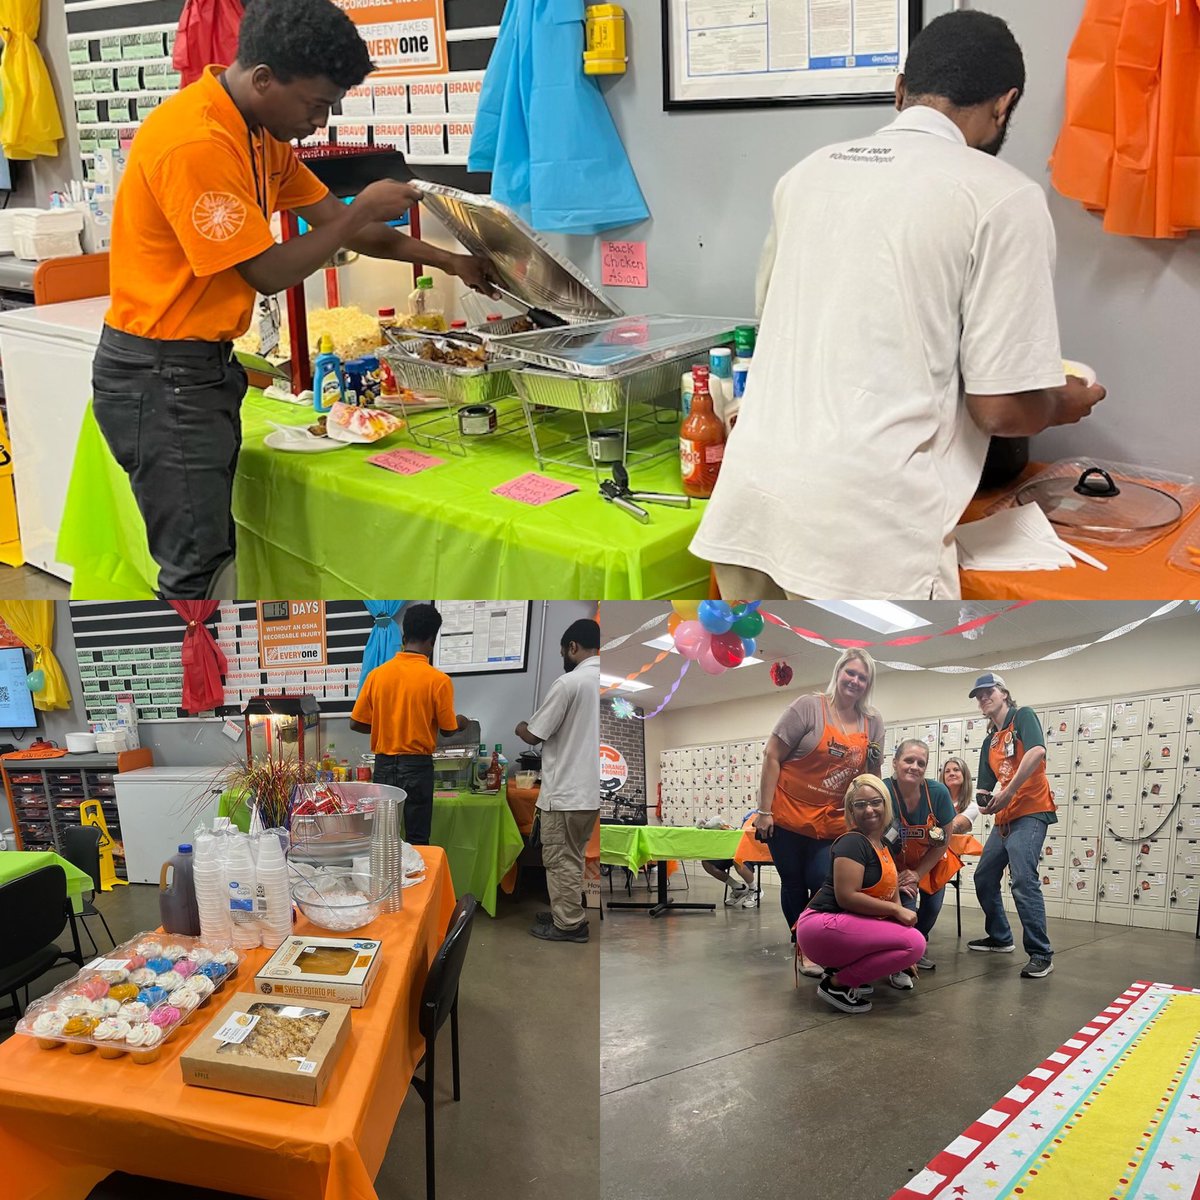 Happy Success Sharing Day!Celebrate your People…. They need, Deserve, and Earned it!!!! Have fun everyone! @kmn293 @THDMelaniebb @Jme_Dvs @cnellsmith